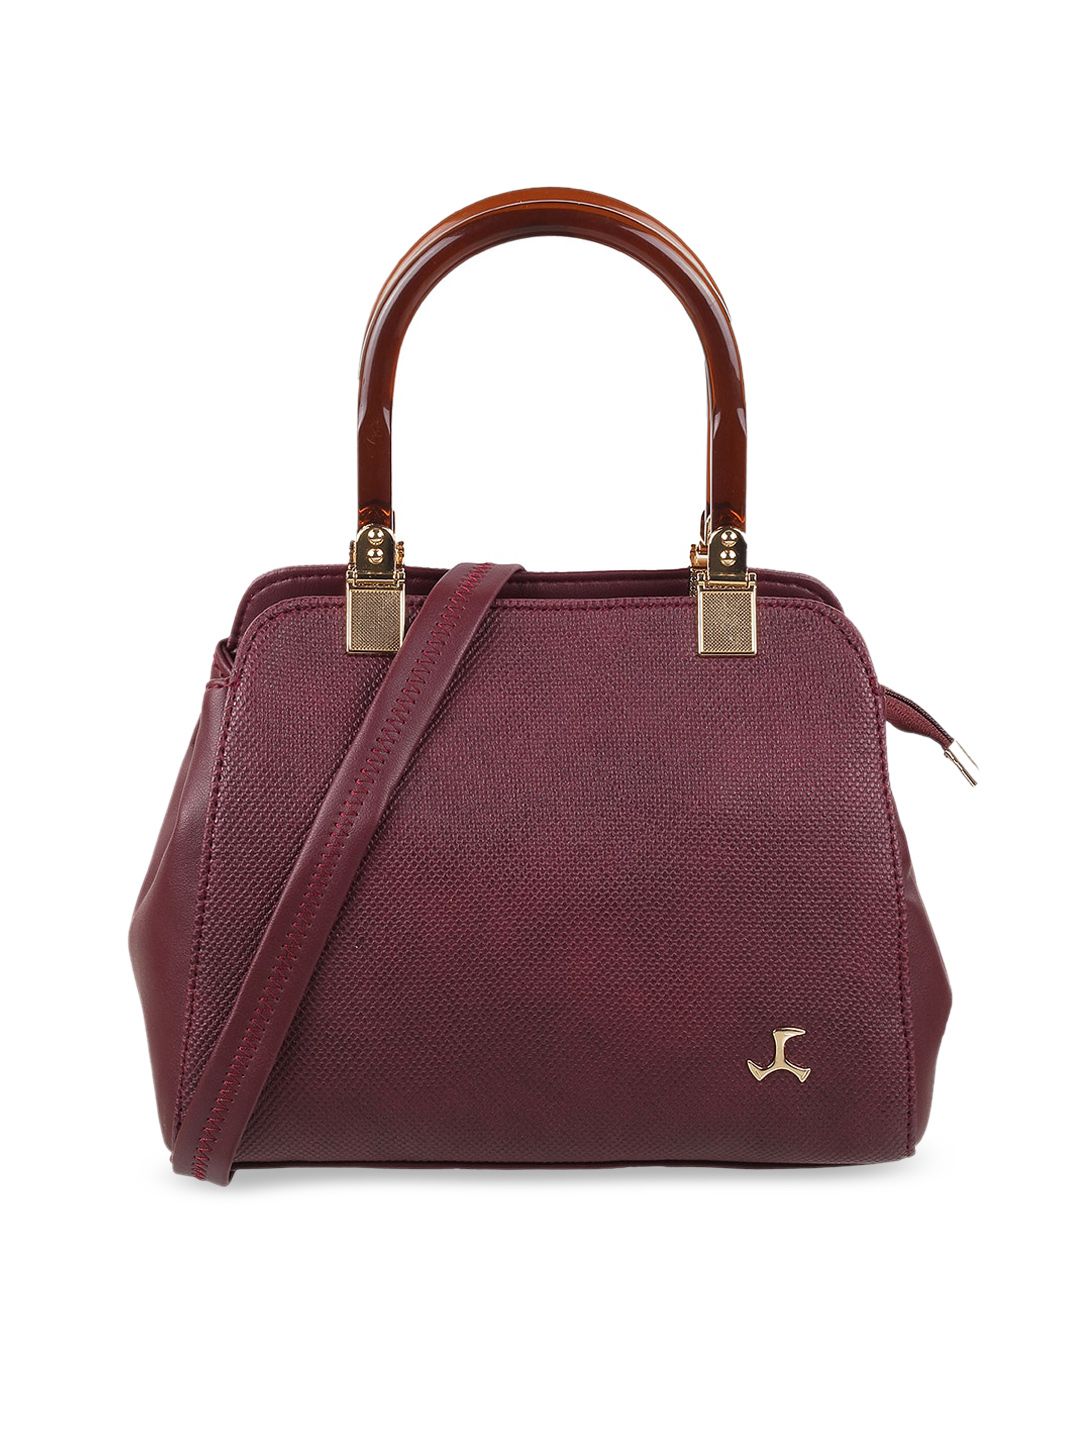 Mochi Maroon Structured Handheld Bag Price in India